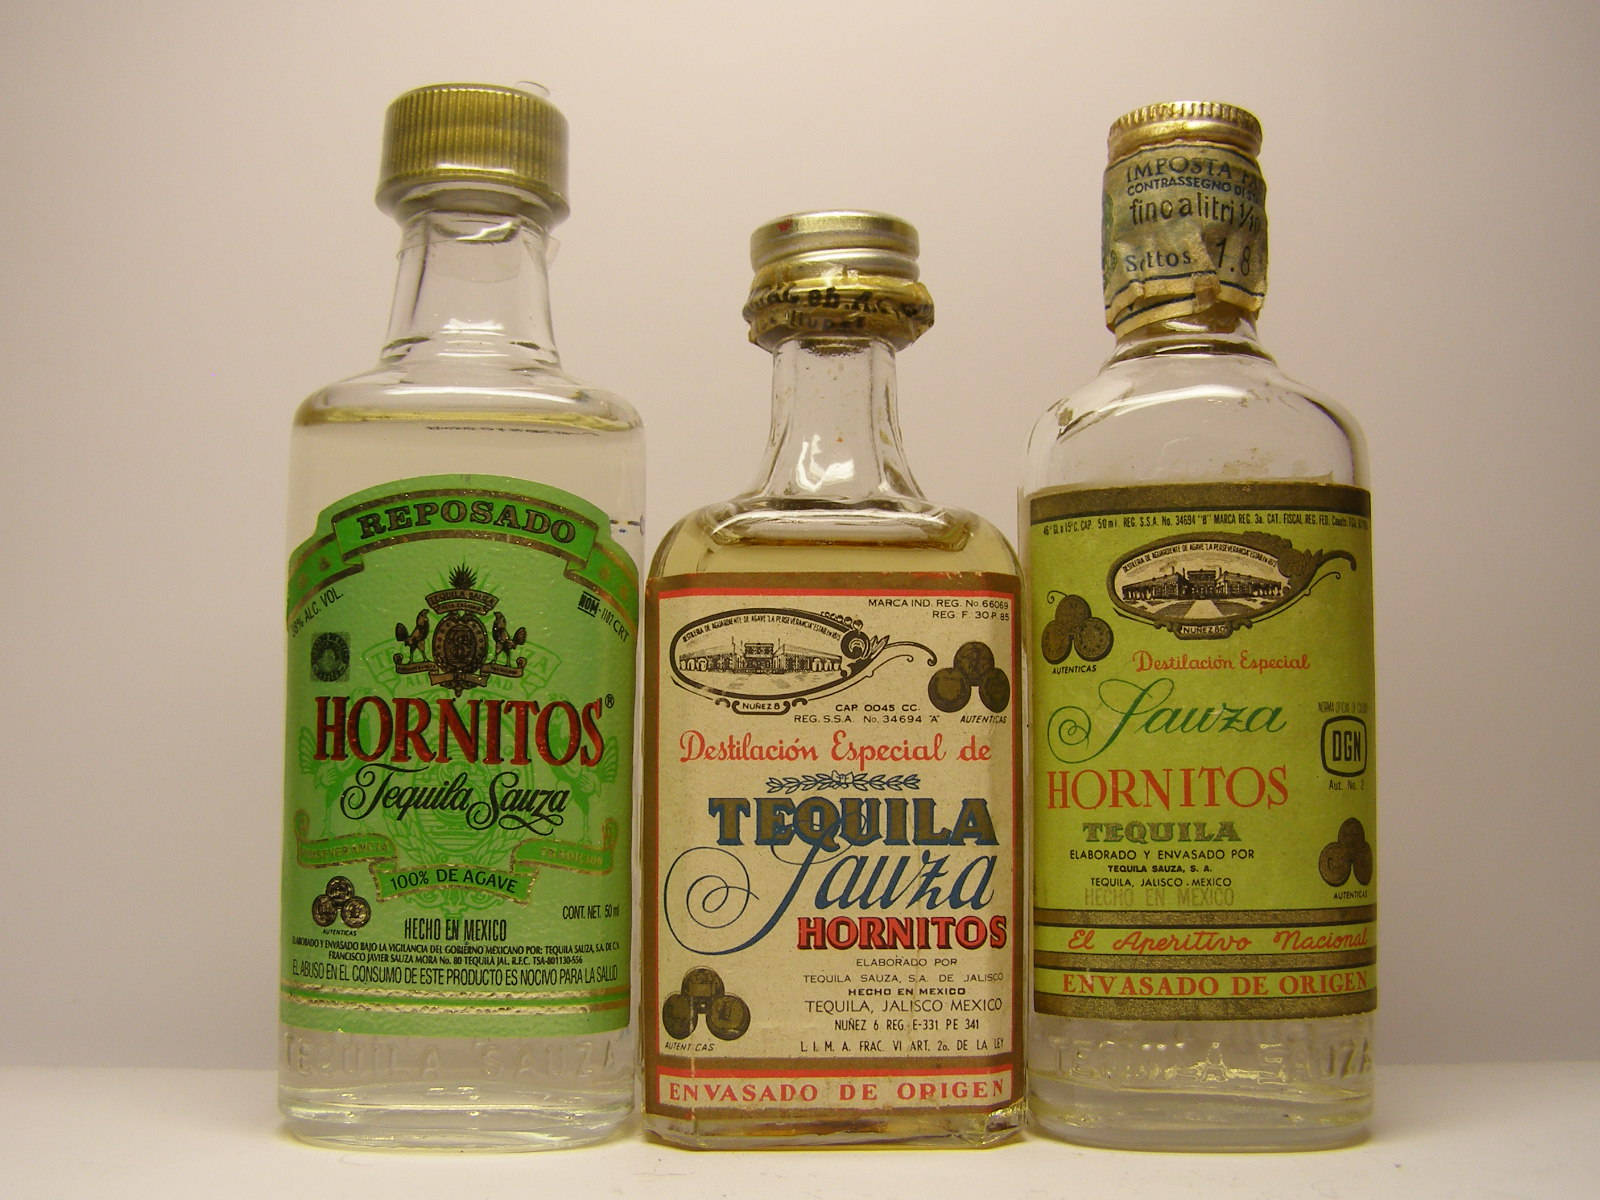 Vintage Bottle of Hornitos Sauza Tequila Wallpaper